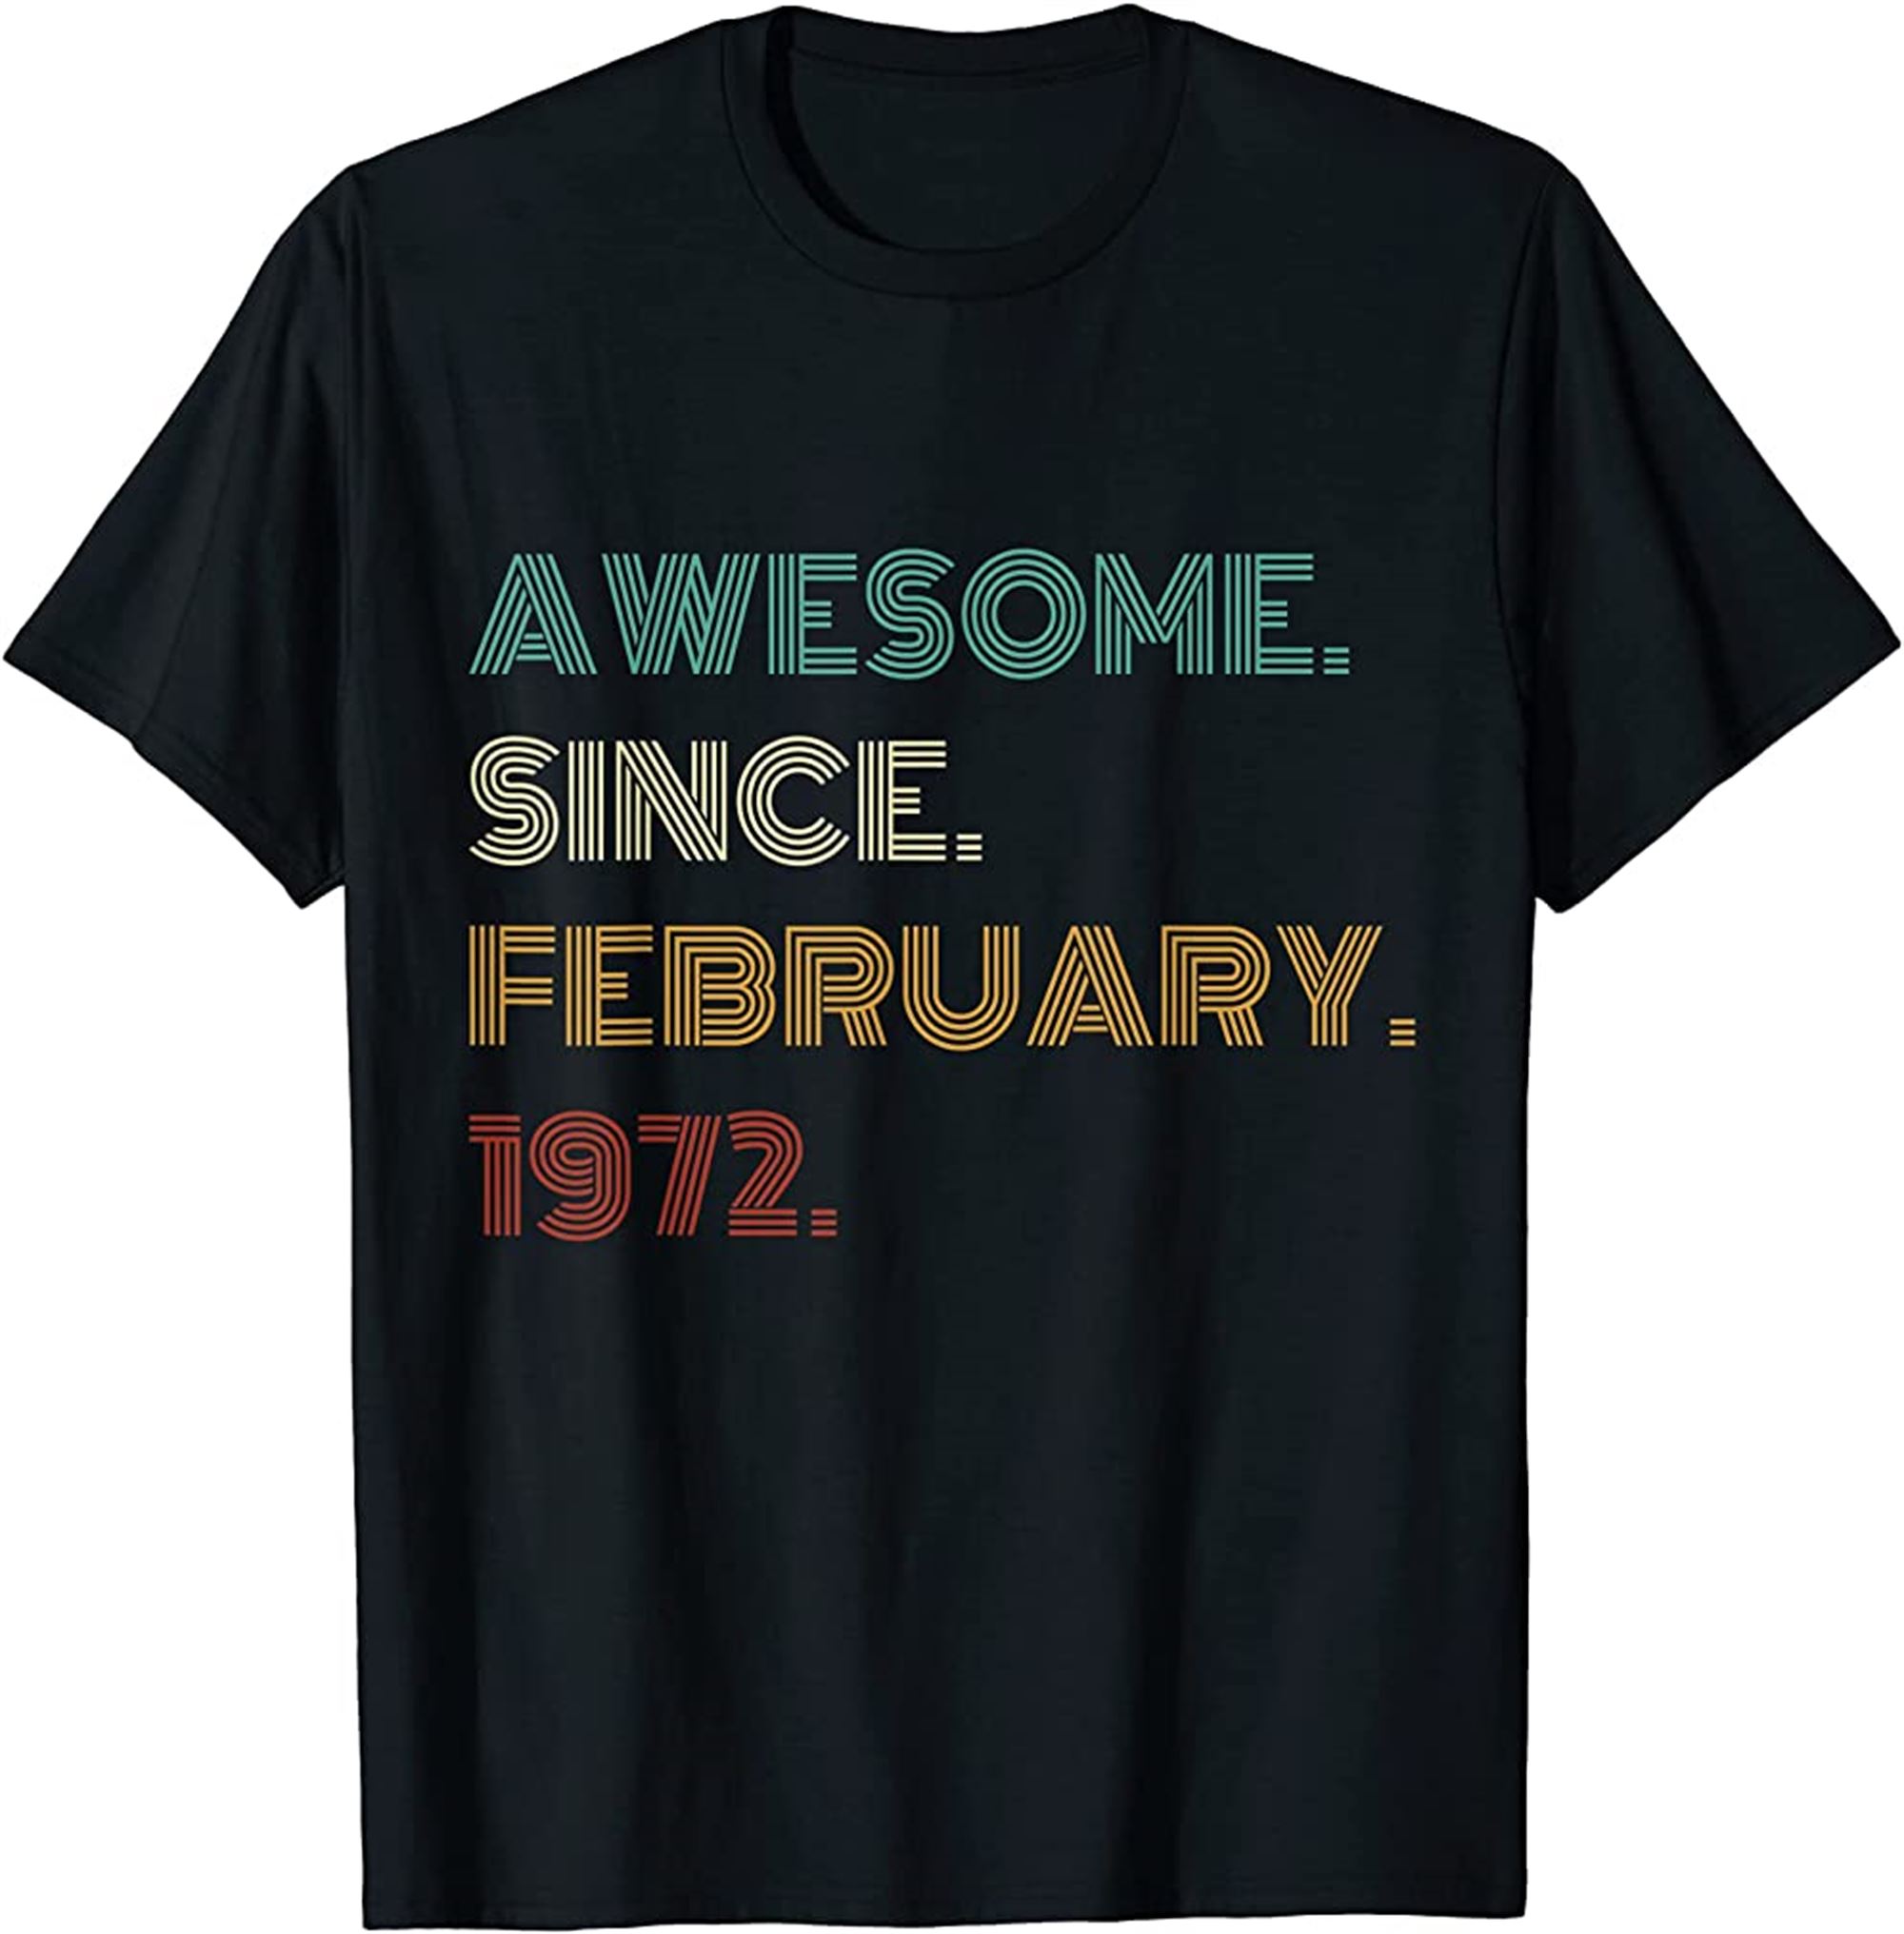 50 Years Old Awesome Since February 1972 50th Birthday T-shirt Full Size Up To 5xl